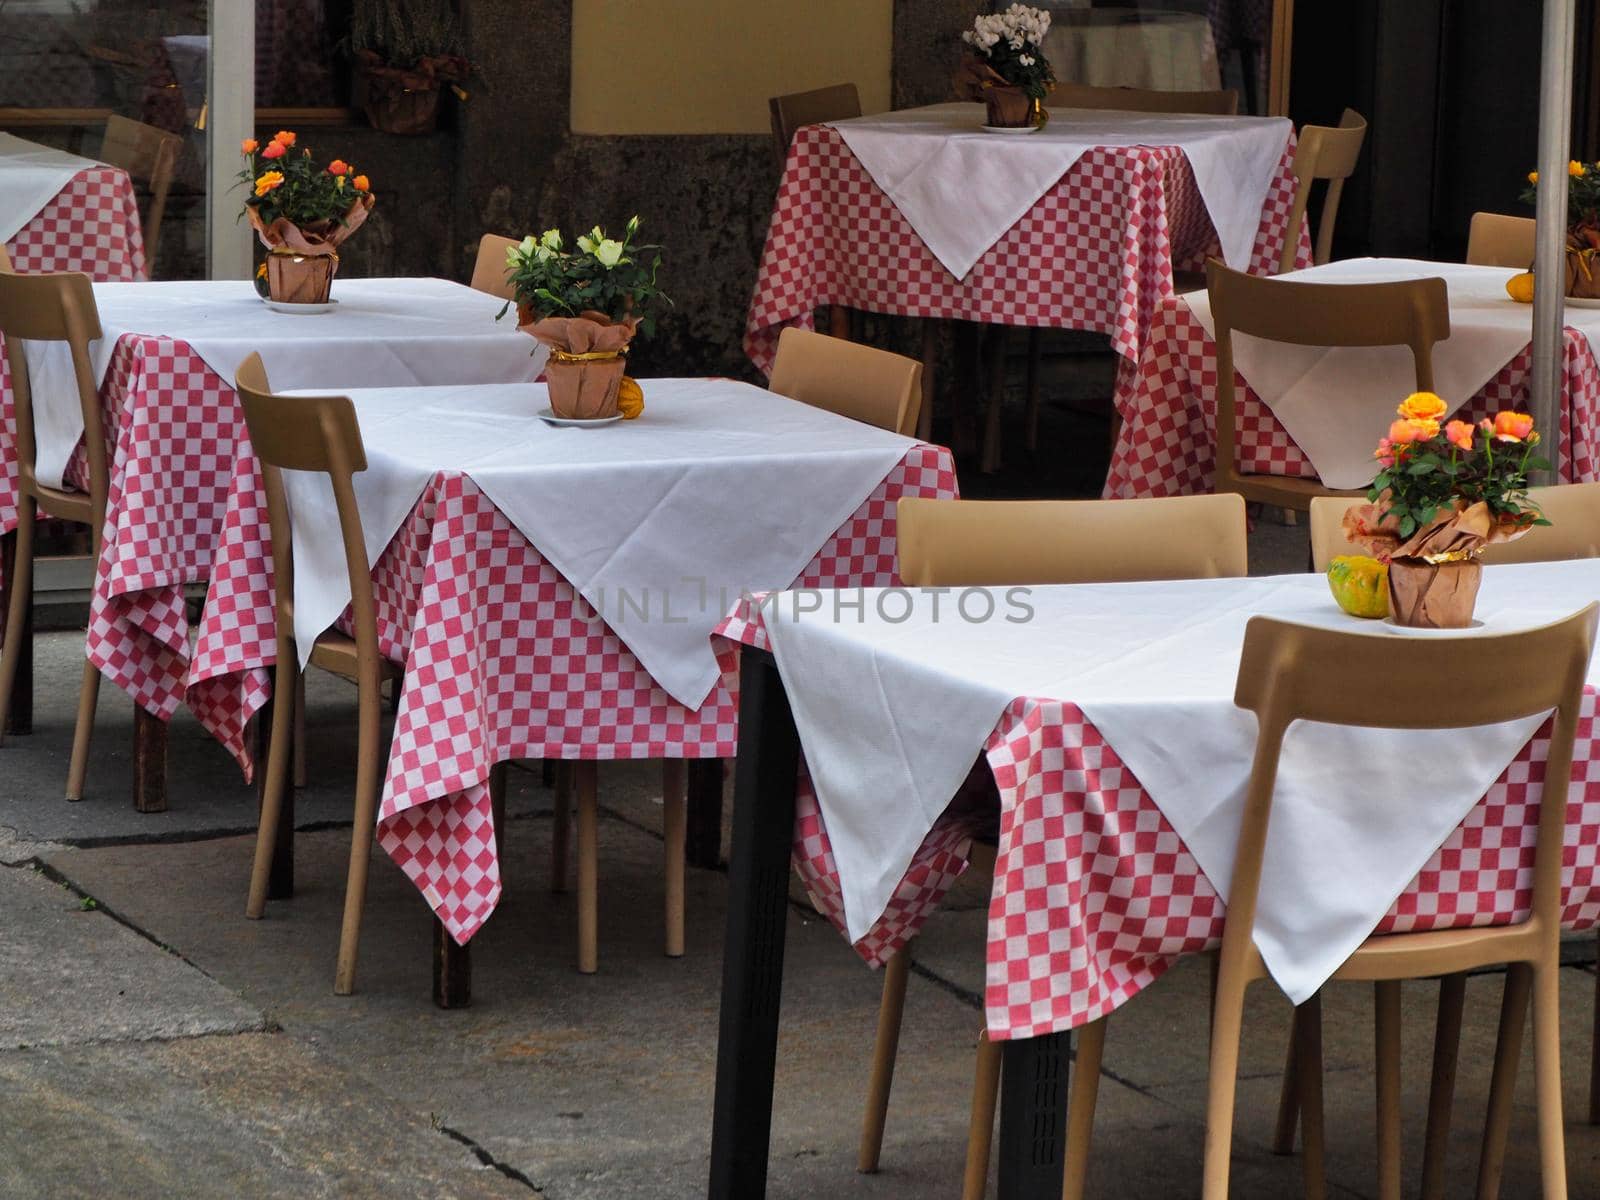 Tables of restaurant terrace deserted after the resurgence of cases of contagion of the pandemic Turin Italy October 16 2020 by lemar